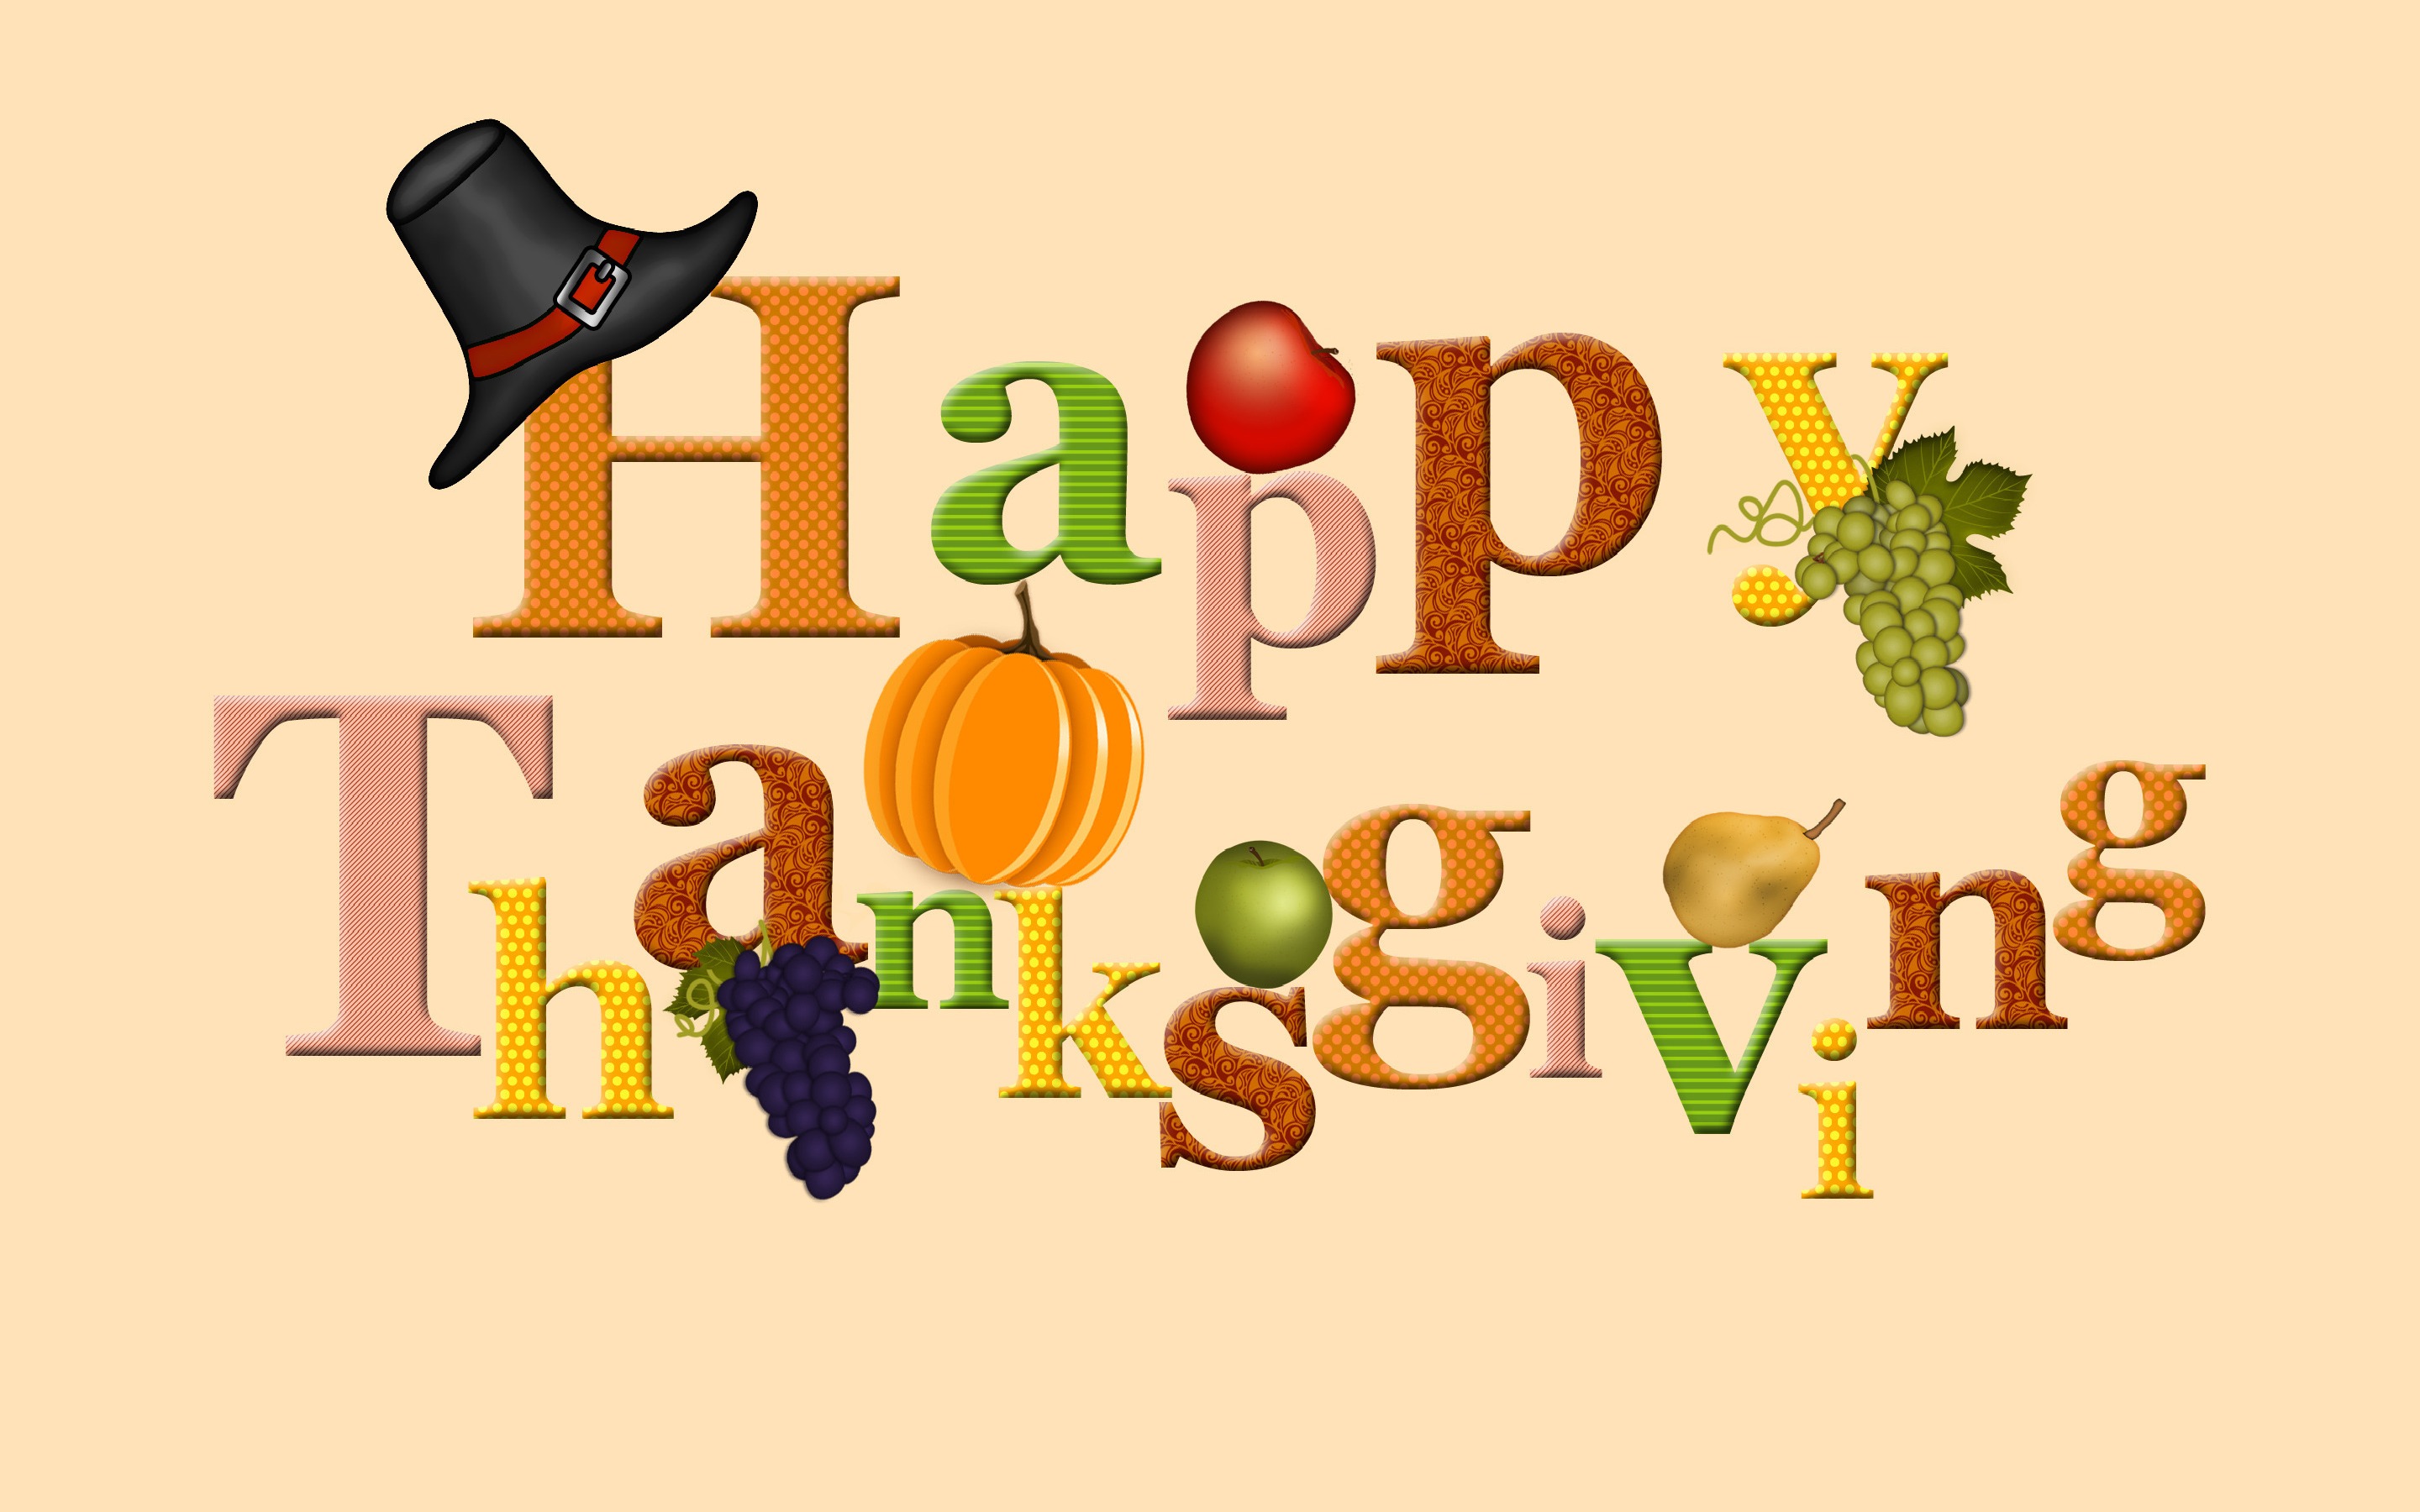 Cute Happy Thanksgiving Wallpaper Quotes Image